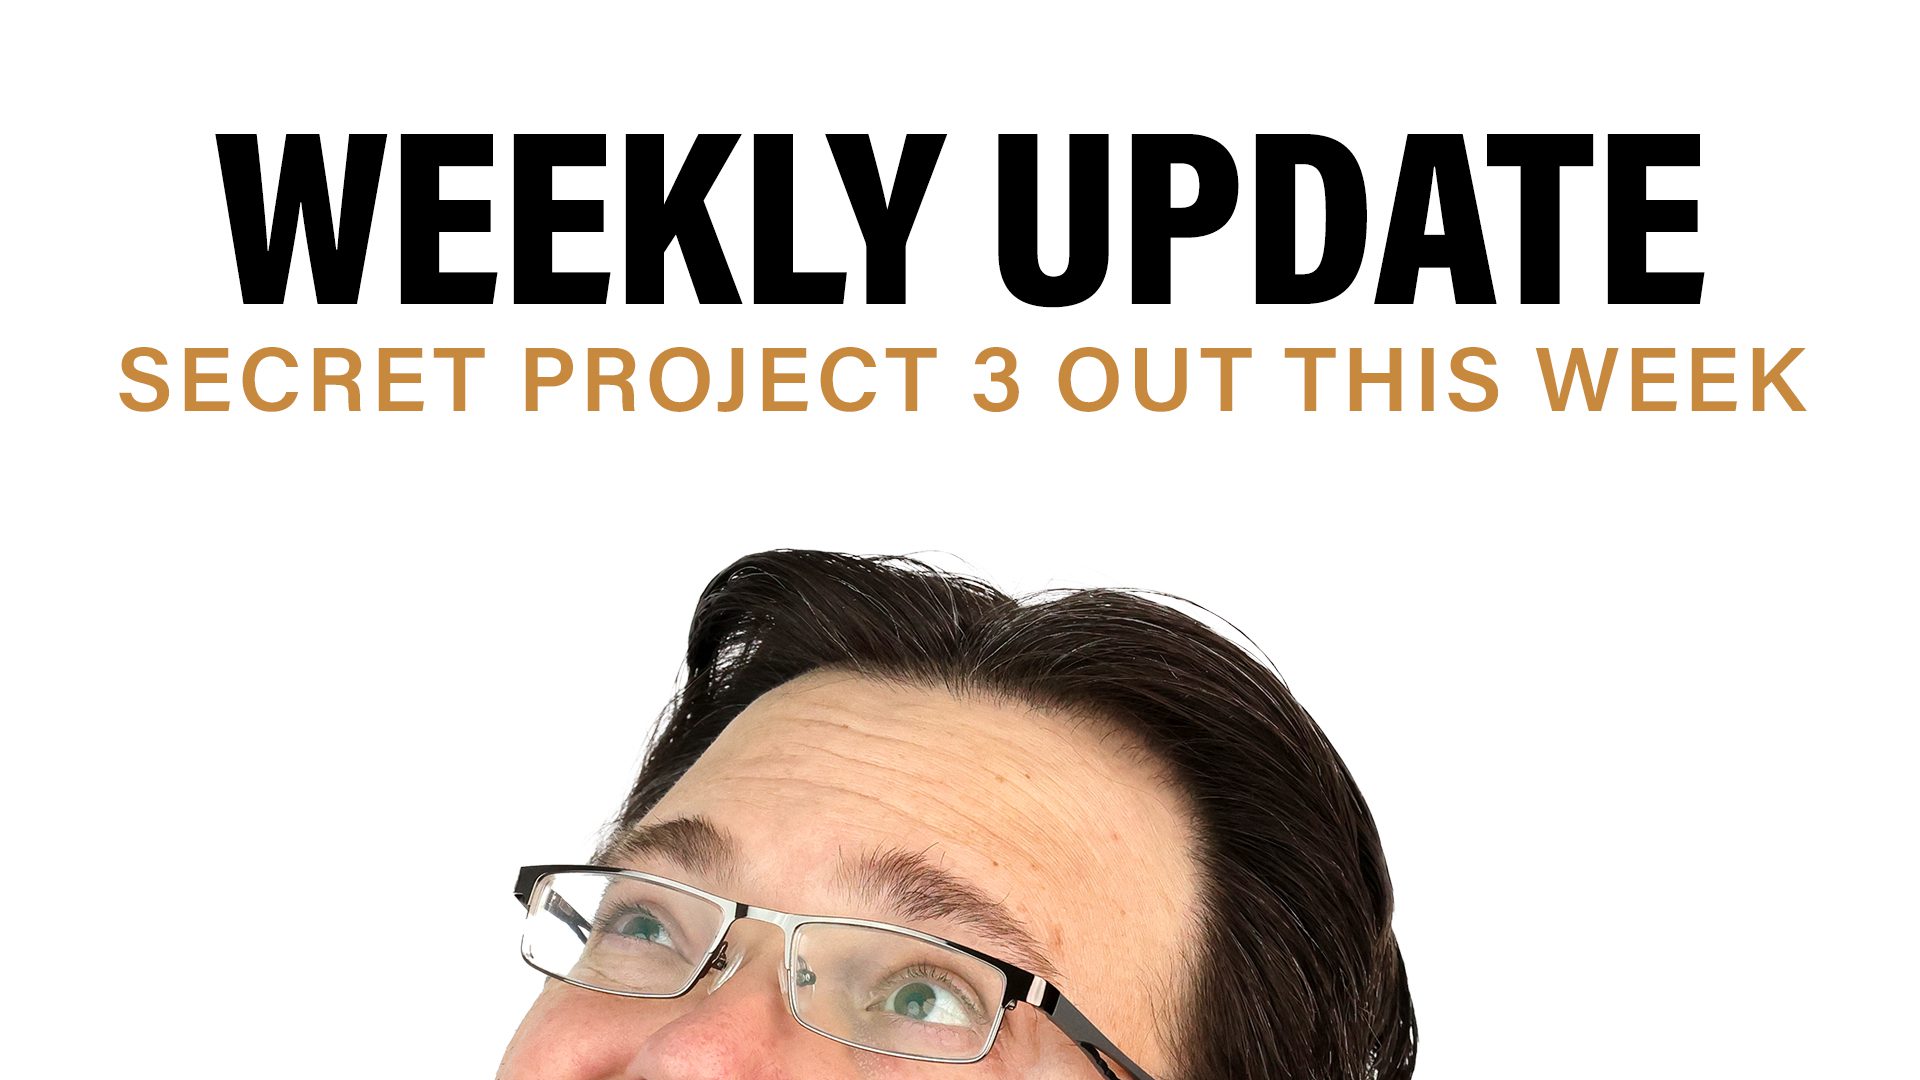 Half of Brandon's face looking up at the words Weekly Update, Secret Project 3 out this week